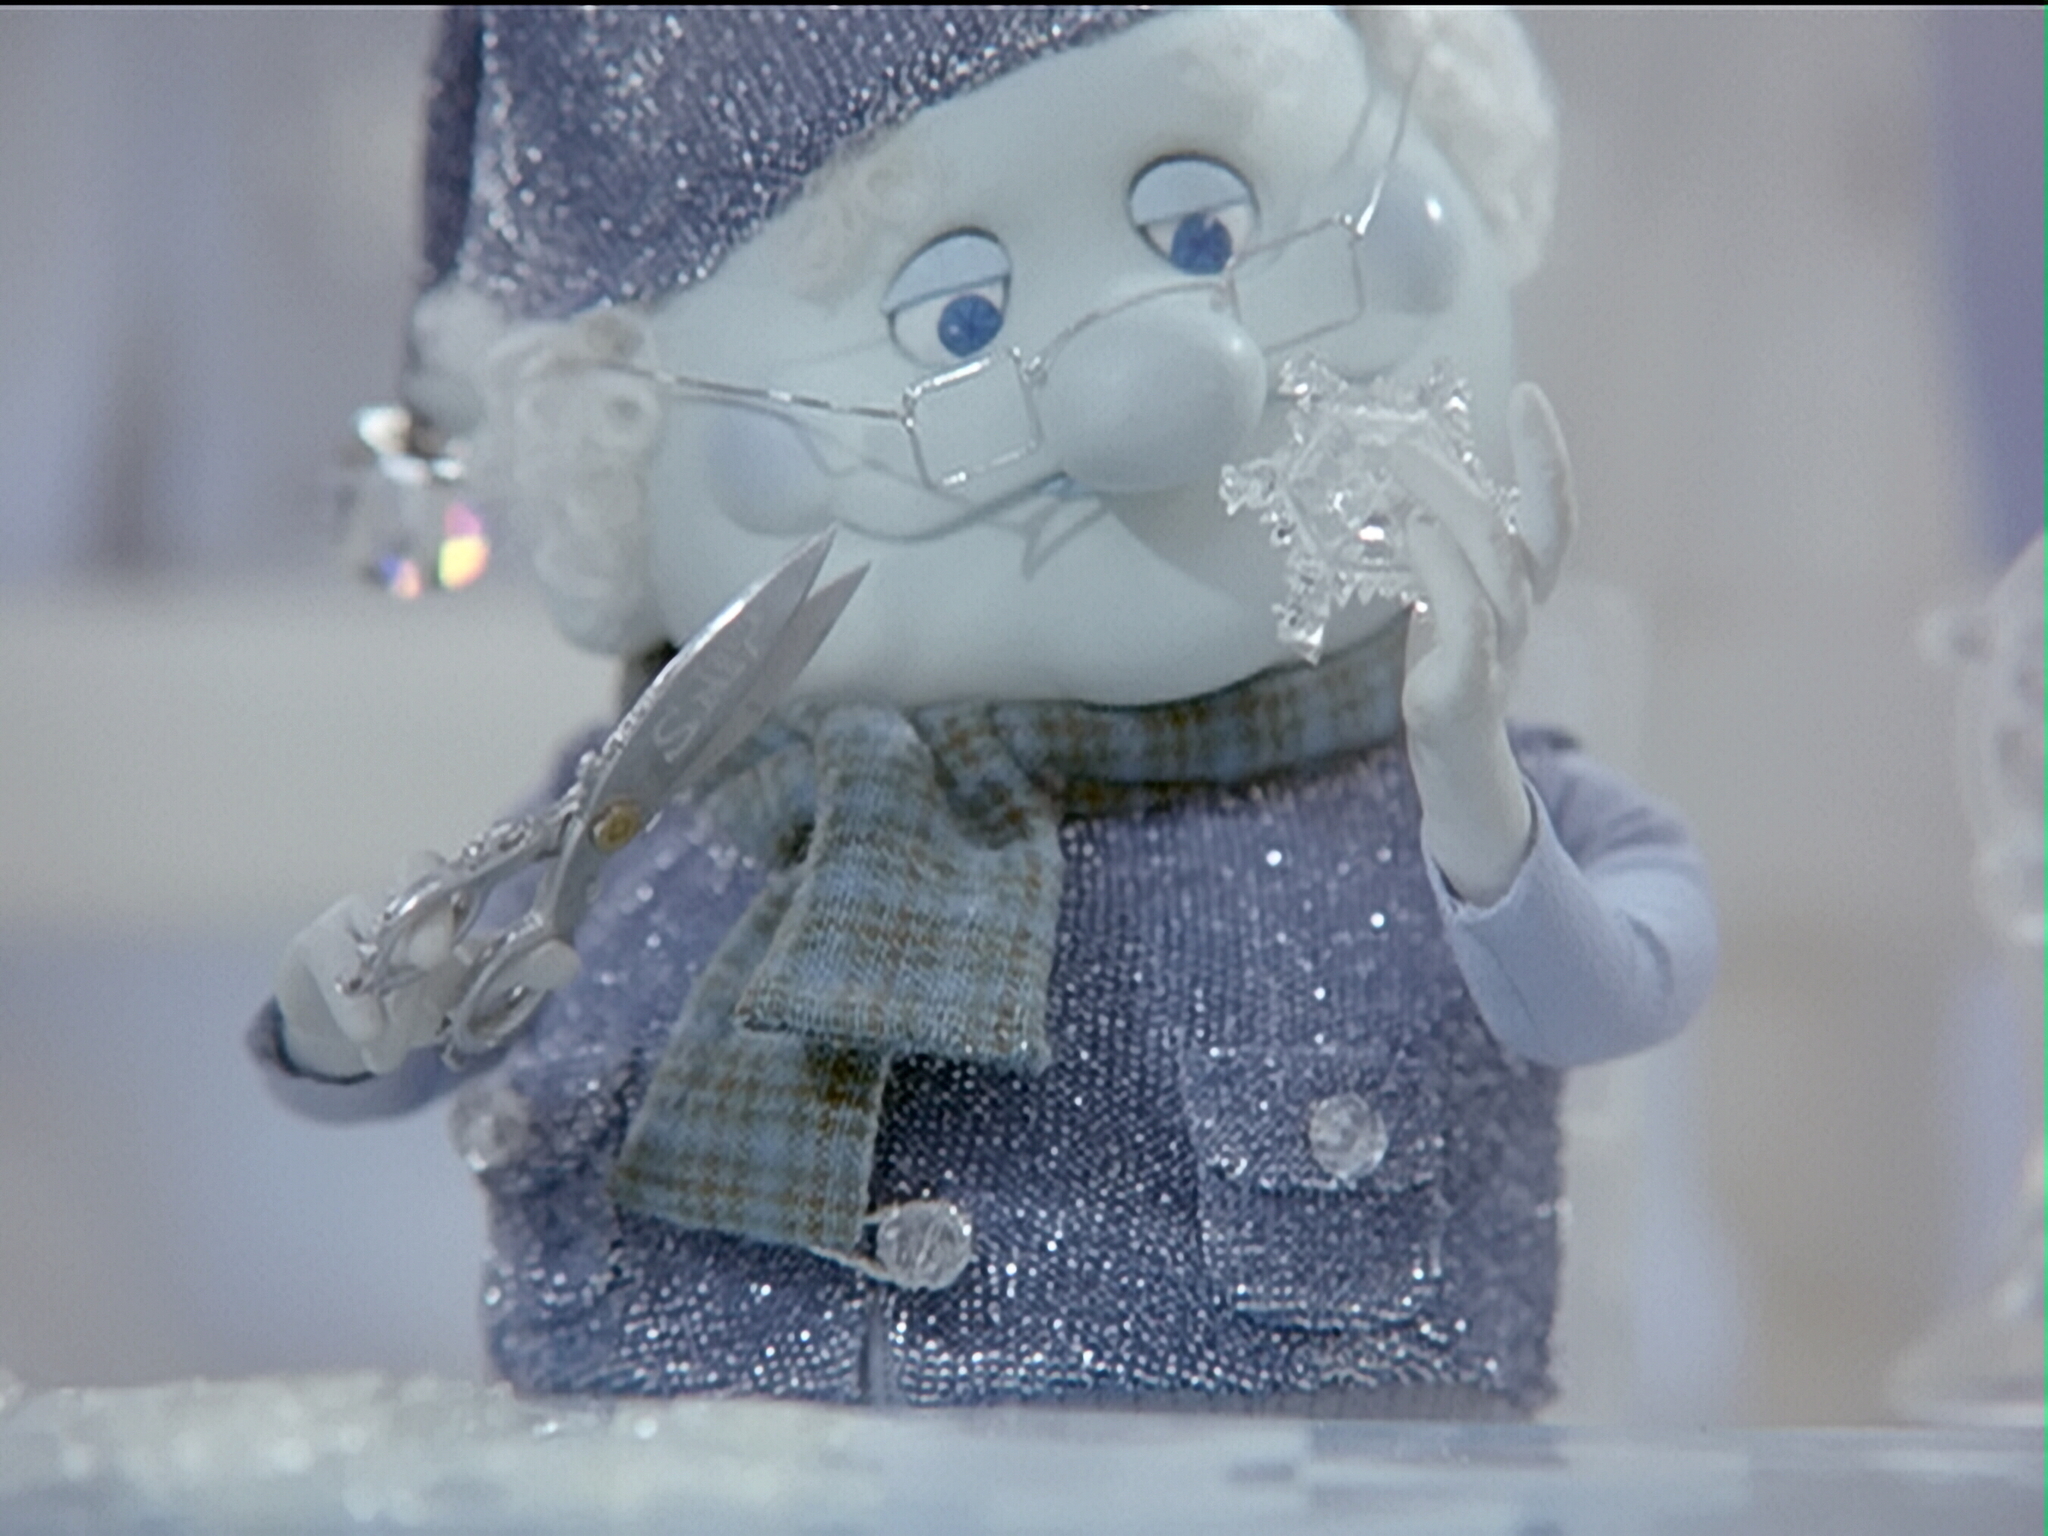 jack frost 1979